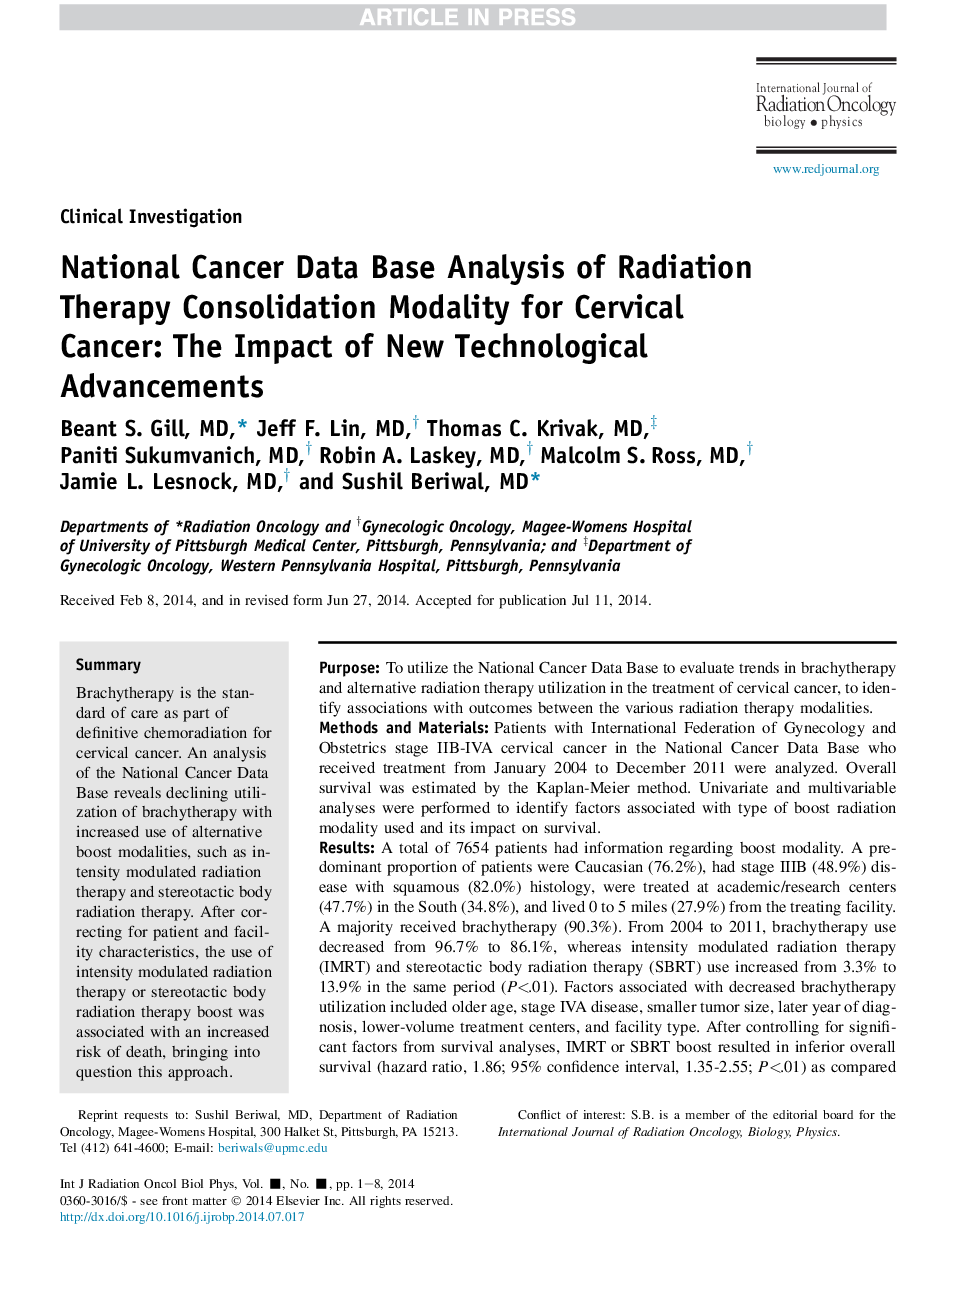 National Cancer Data Base Analysis of Radiation Therapy Consolidation Modality for Cervical Cancer: The Impact of New Technological Advancements